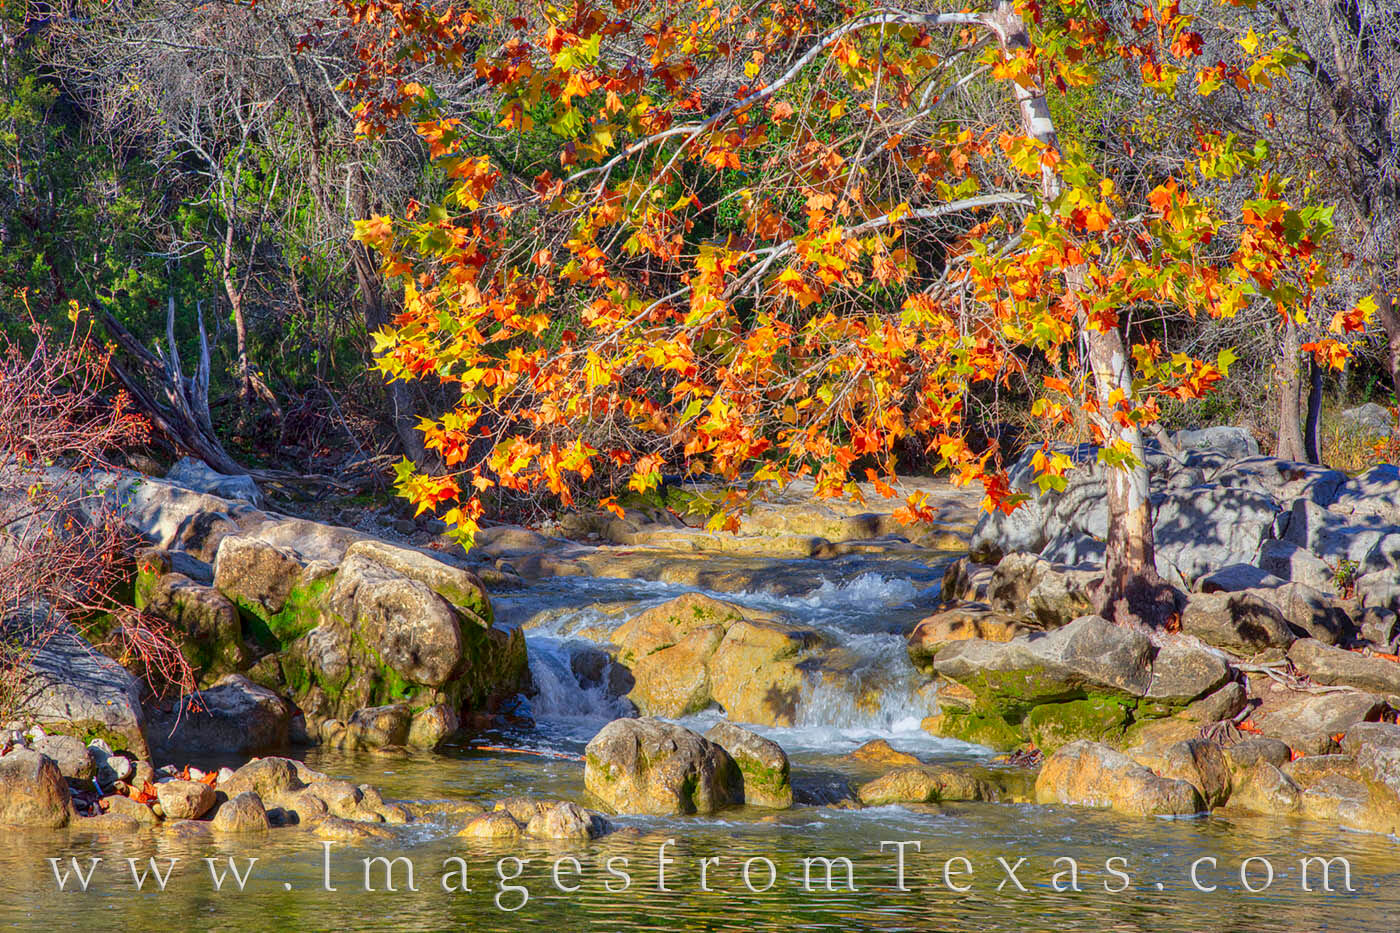 An oak tree shows off its fall colors over a small cascade along Austin's Barton Creek Greebelt. This sanctuary on the edge of...